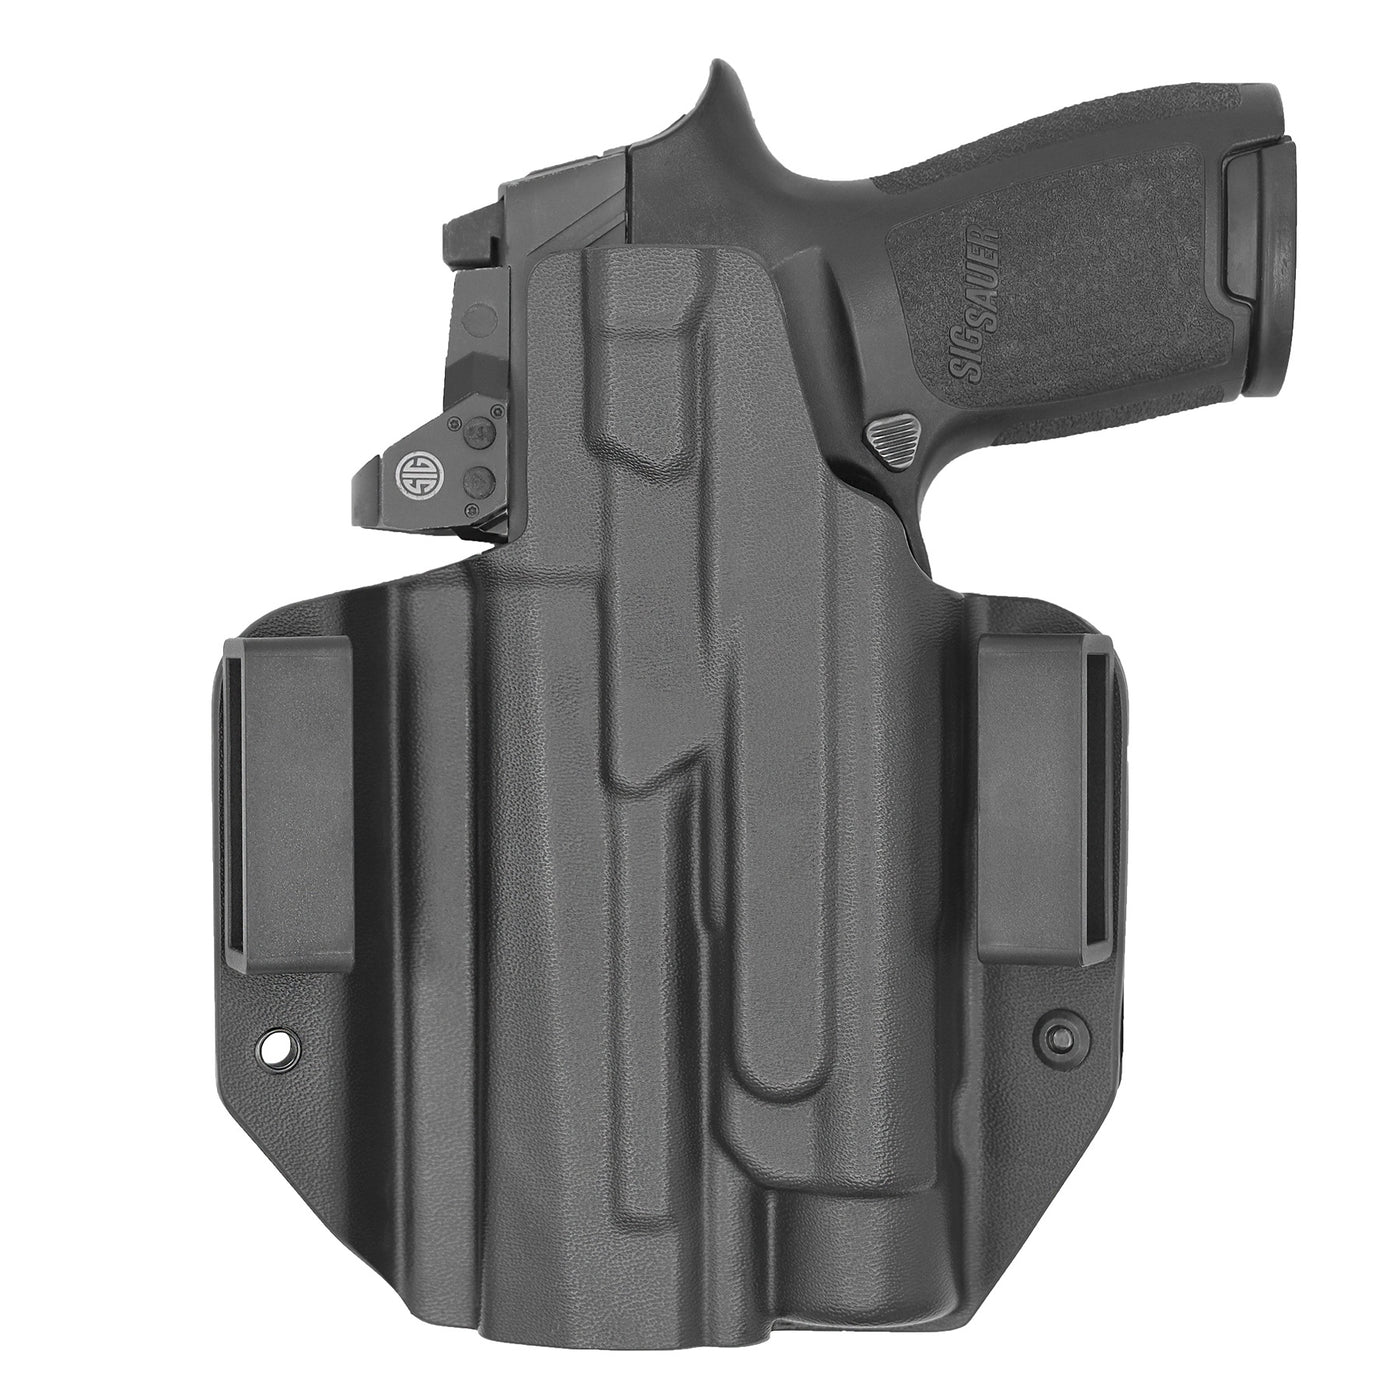 C&G Holsters quickship OWB Tactical Springfield XD-M Elite Streamlight TLR1 in holstered position back view